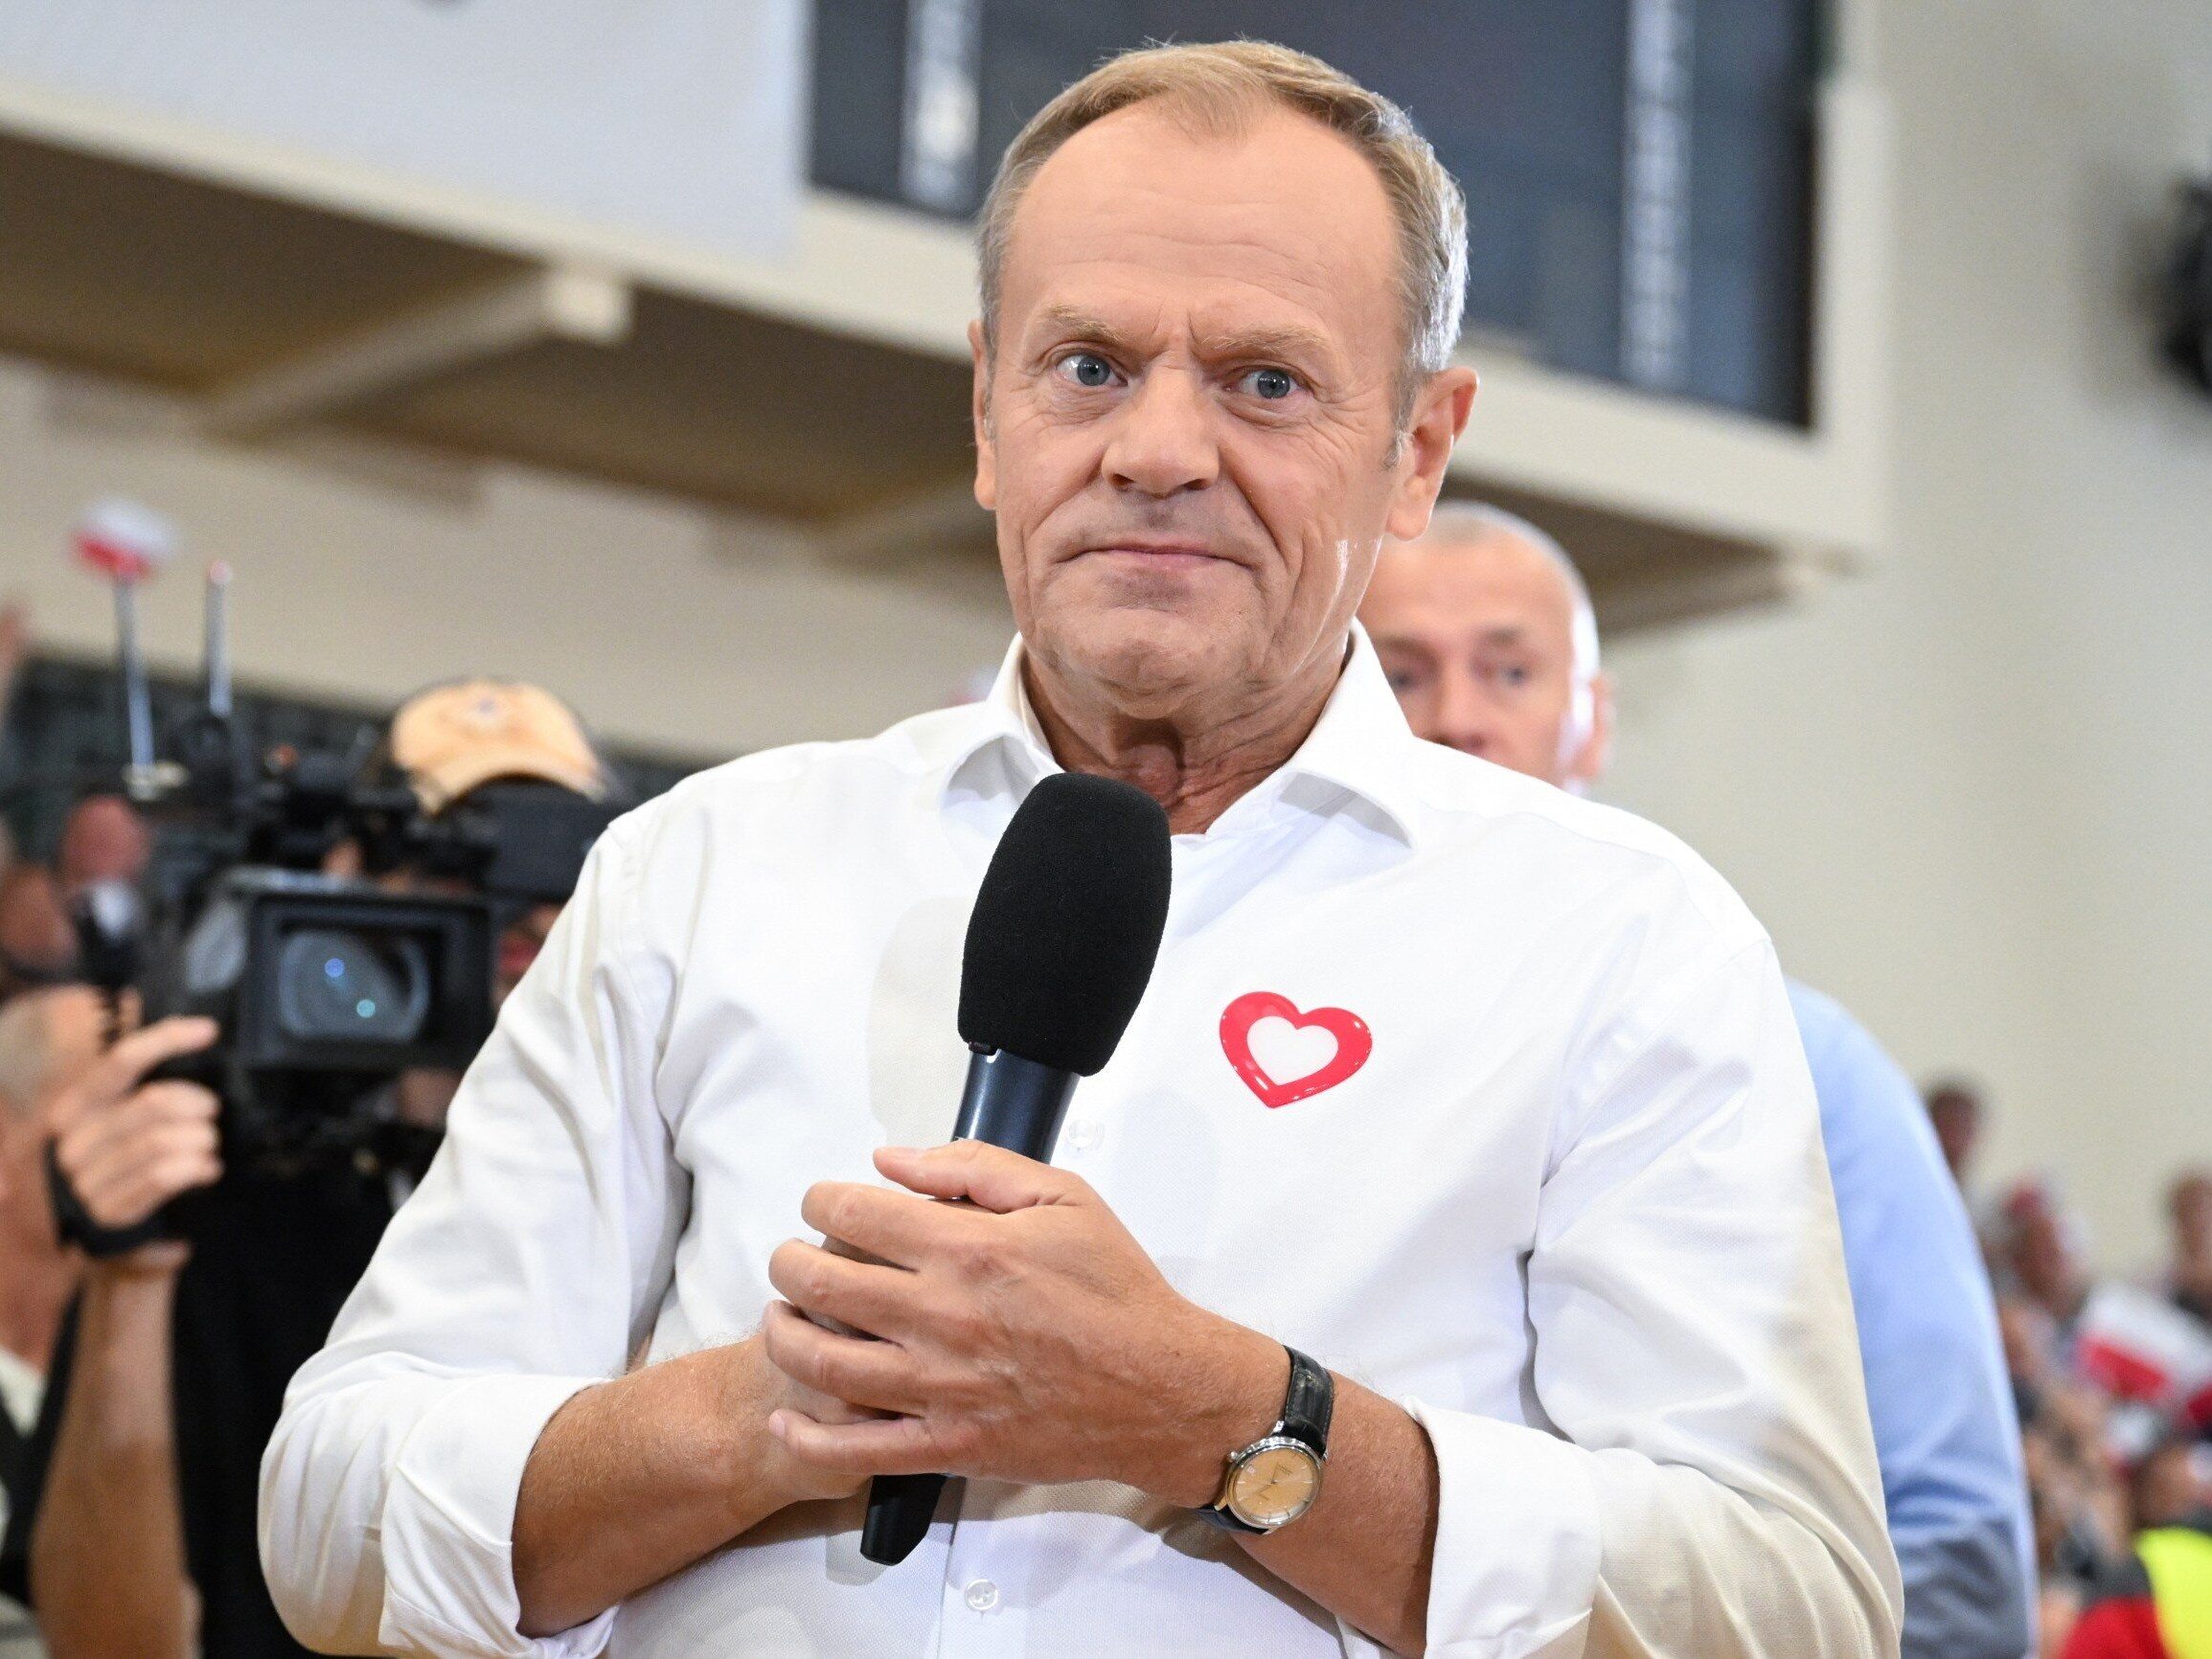 Donald Tusk about the debate on TVP.  “Whatever else they come up with, I know you'll be there.”